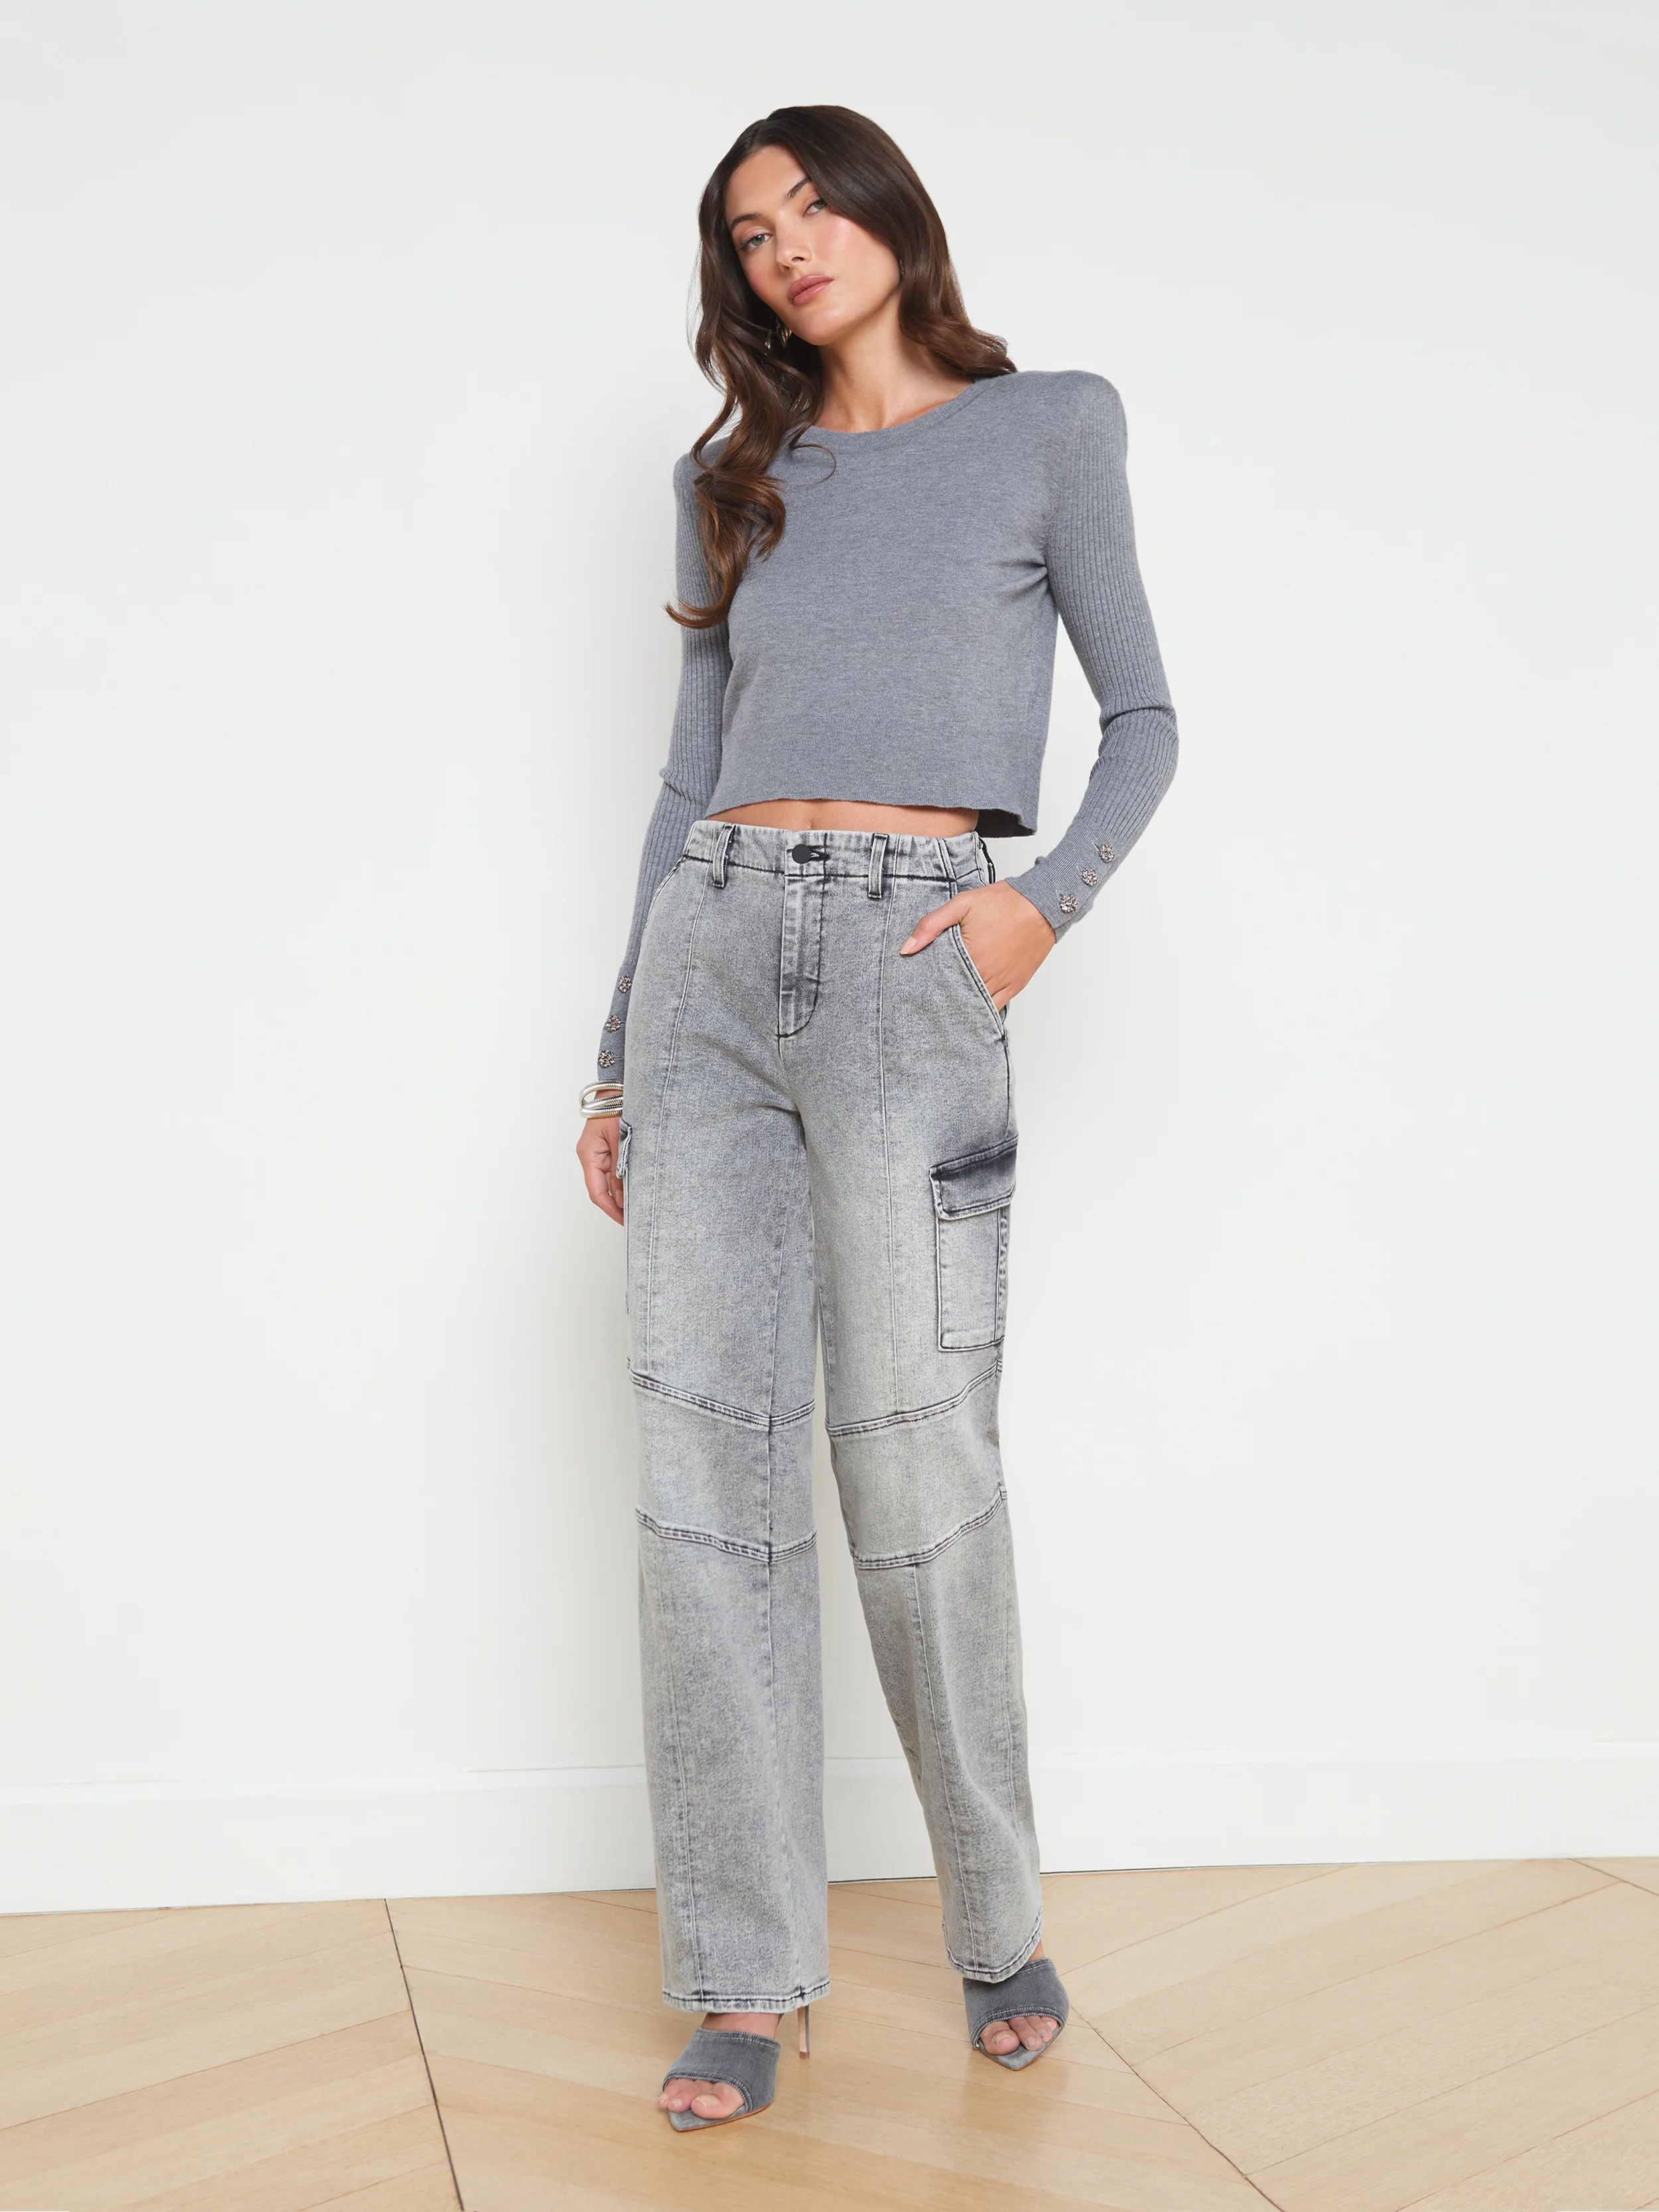 L'AGENCE - Brooklyn High-Rise Cargo Jean in Clifton | L'Agence